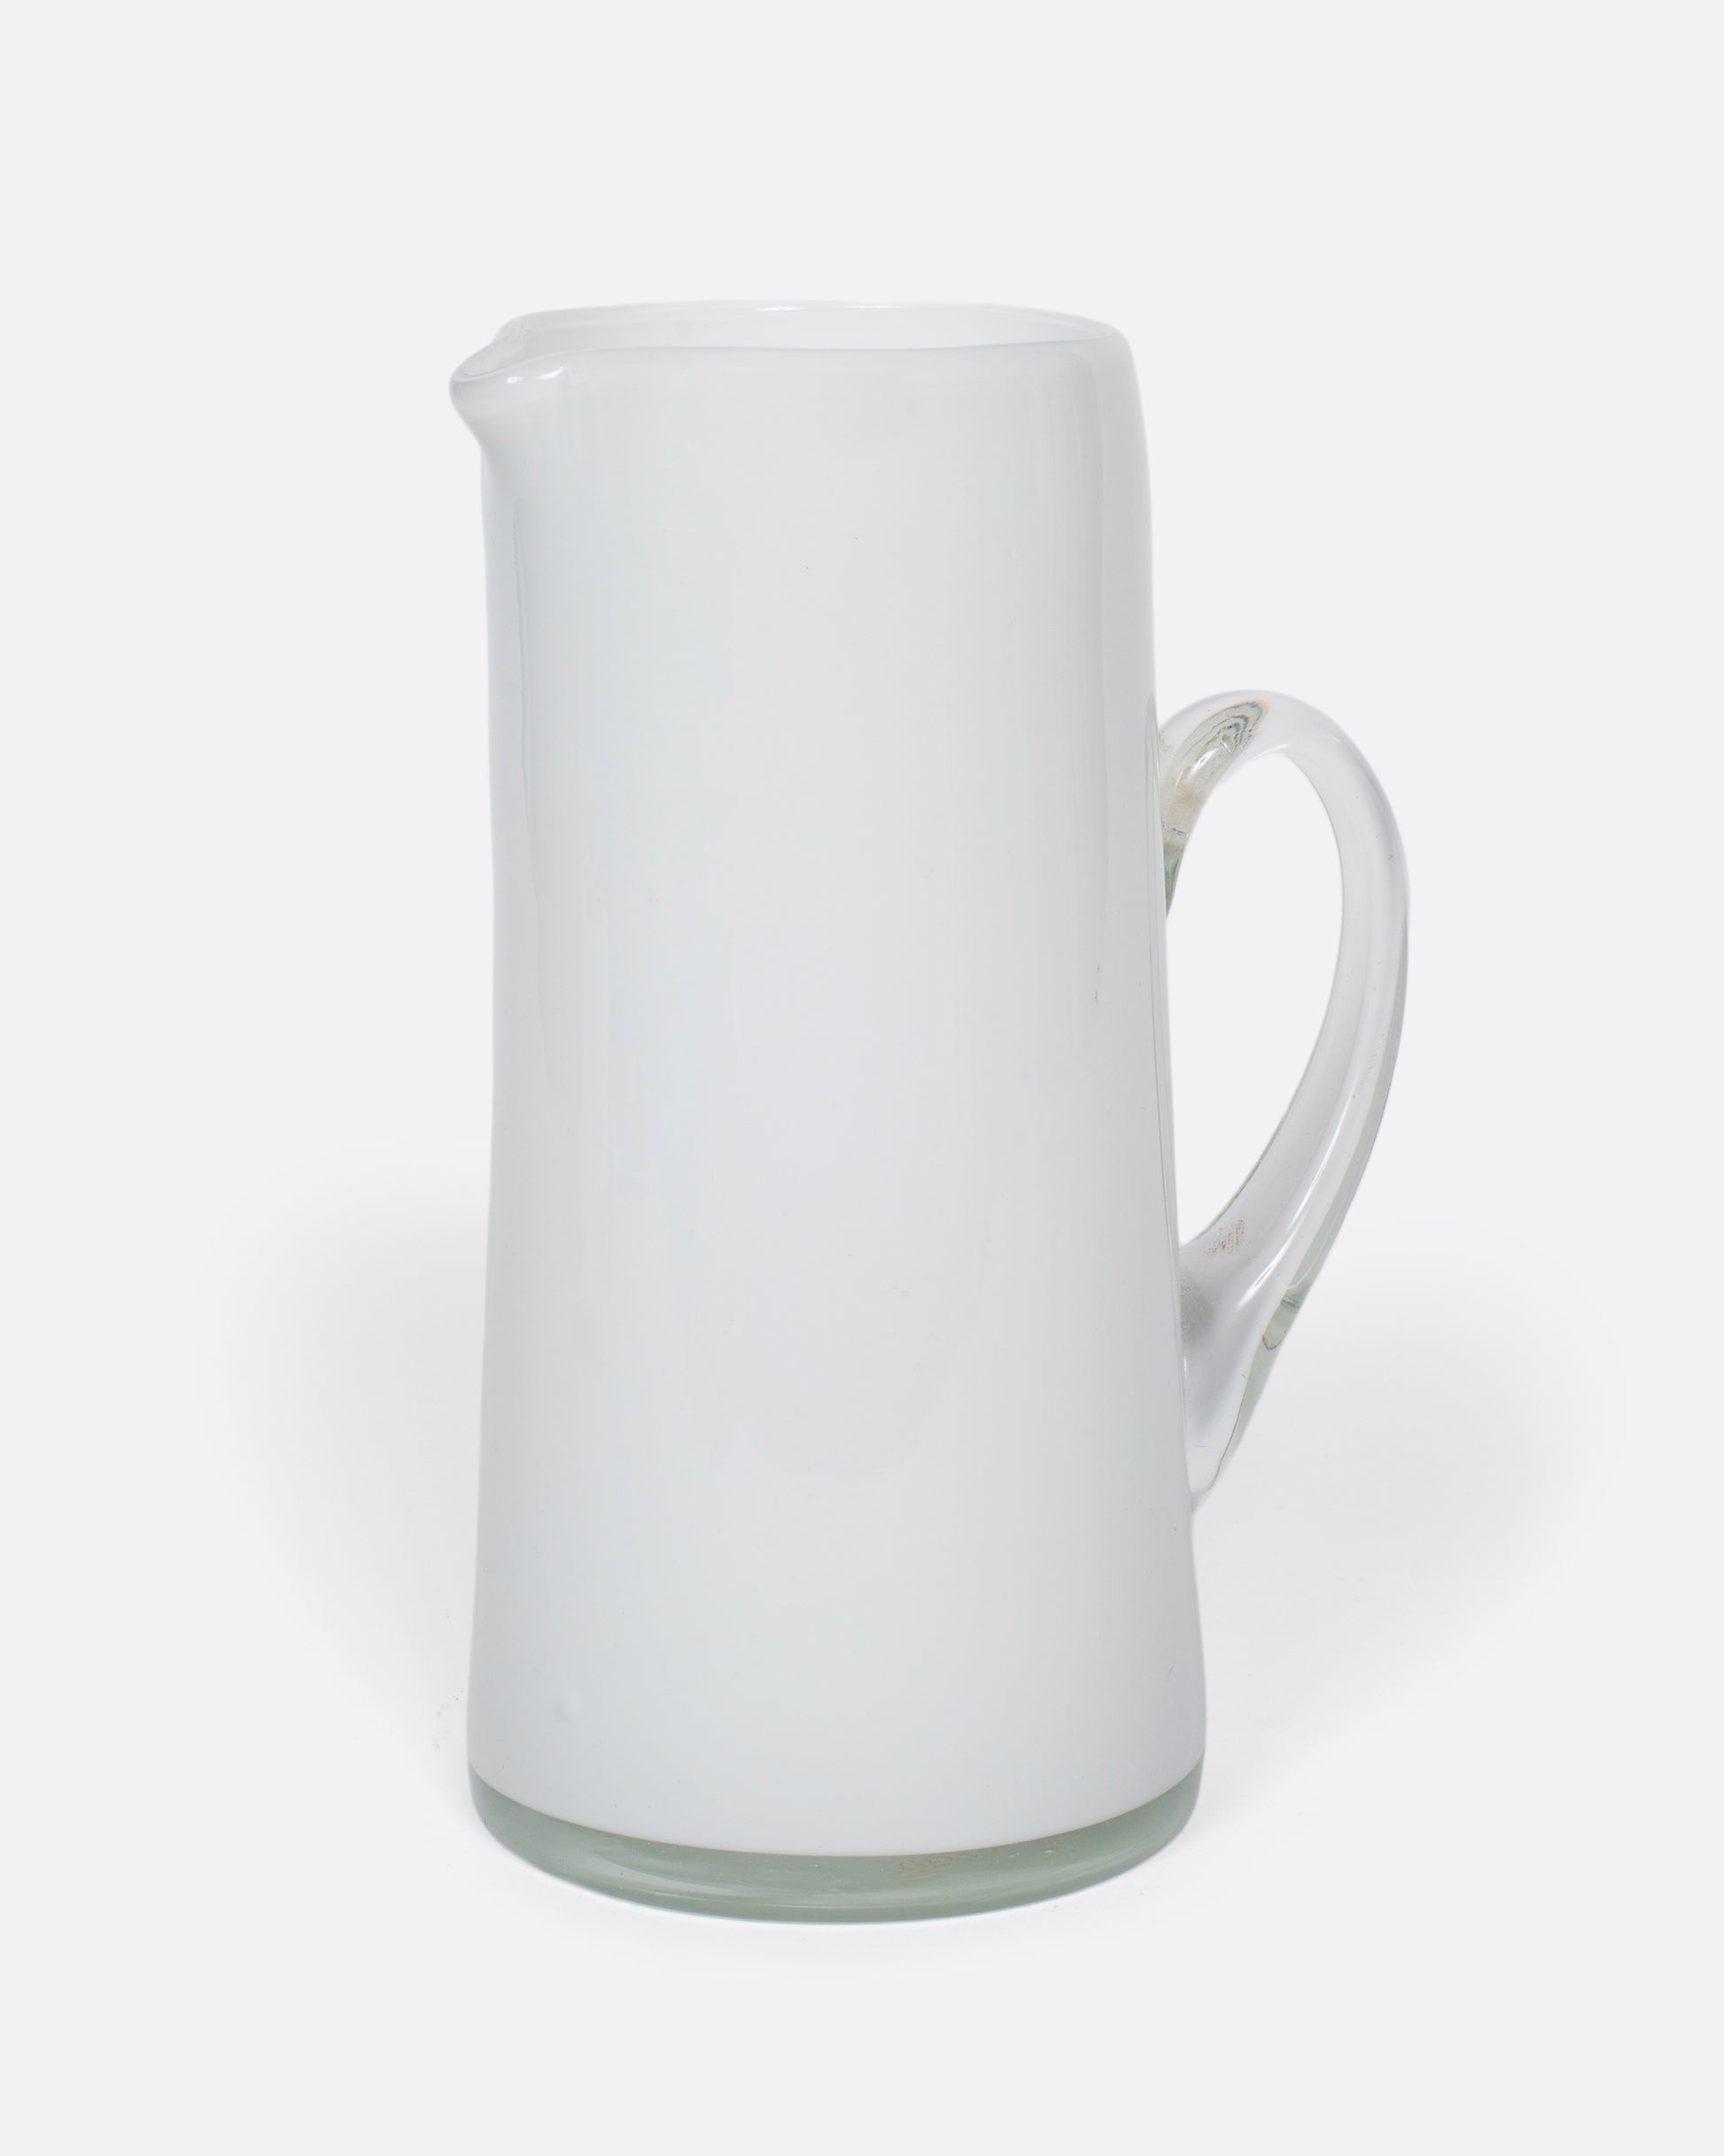 A vintage white cased glass pitcher. Two layers of white glass add depth to its color, creating an elegant, sleek look.